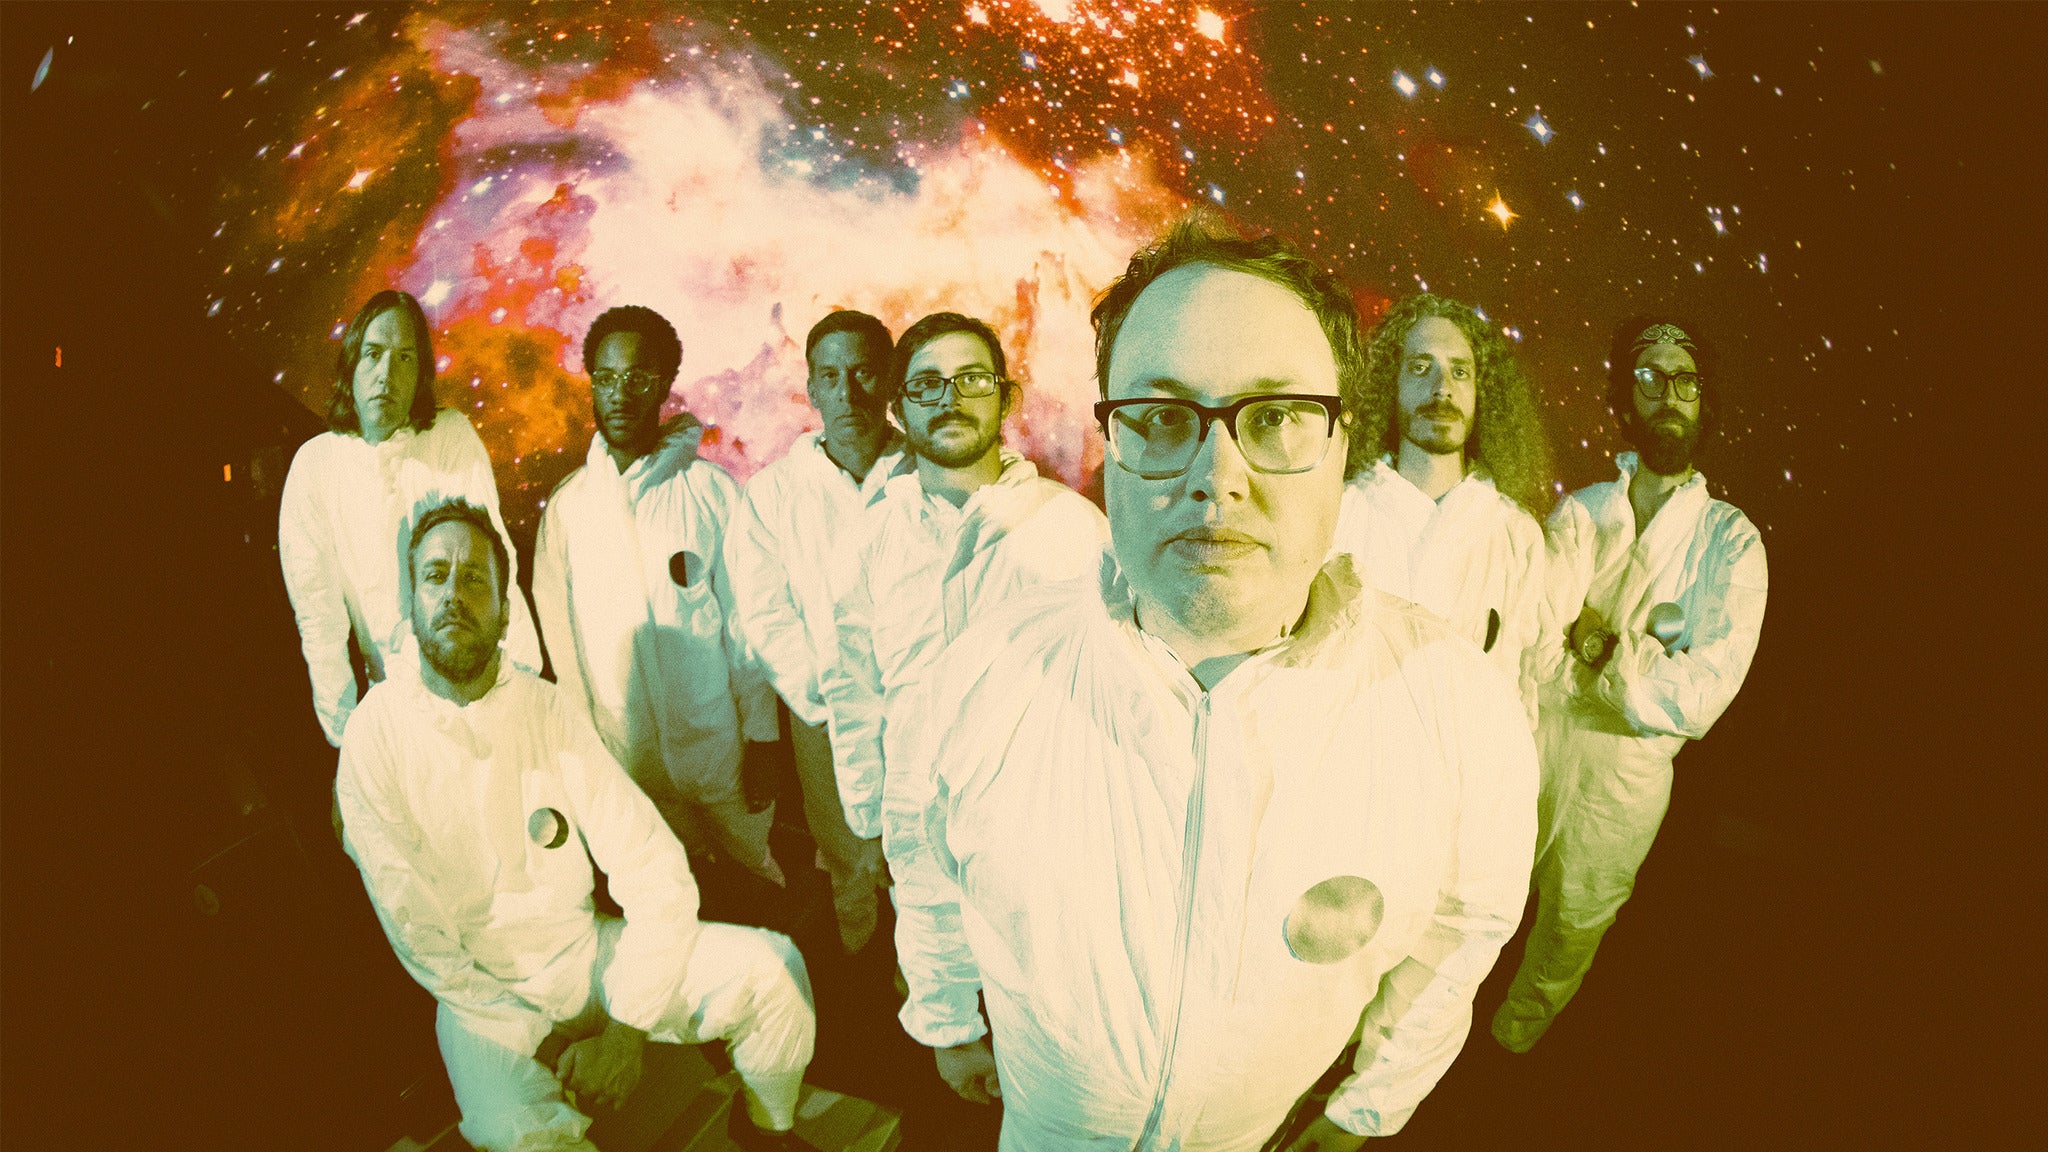 St. Paul and the Broken Bones: The Alien Coast Tour in Seattle promo photo for Artist presale offer code